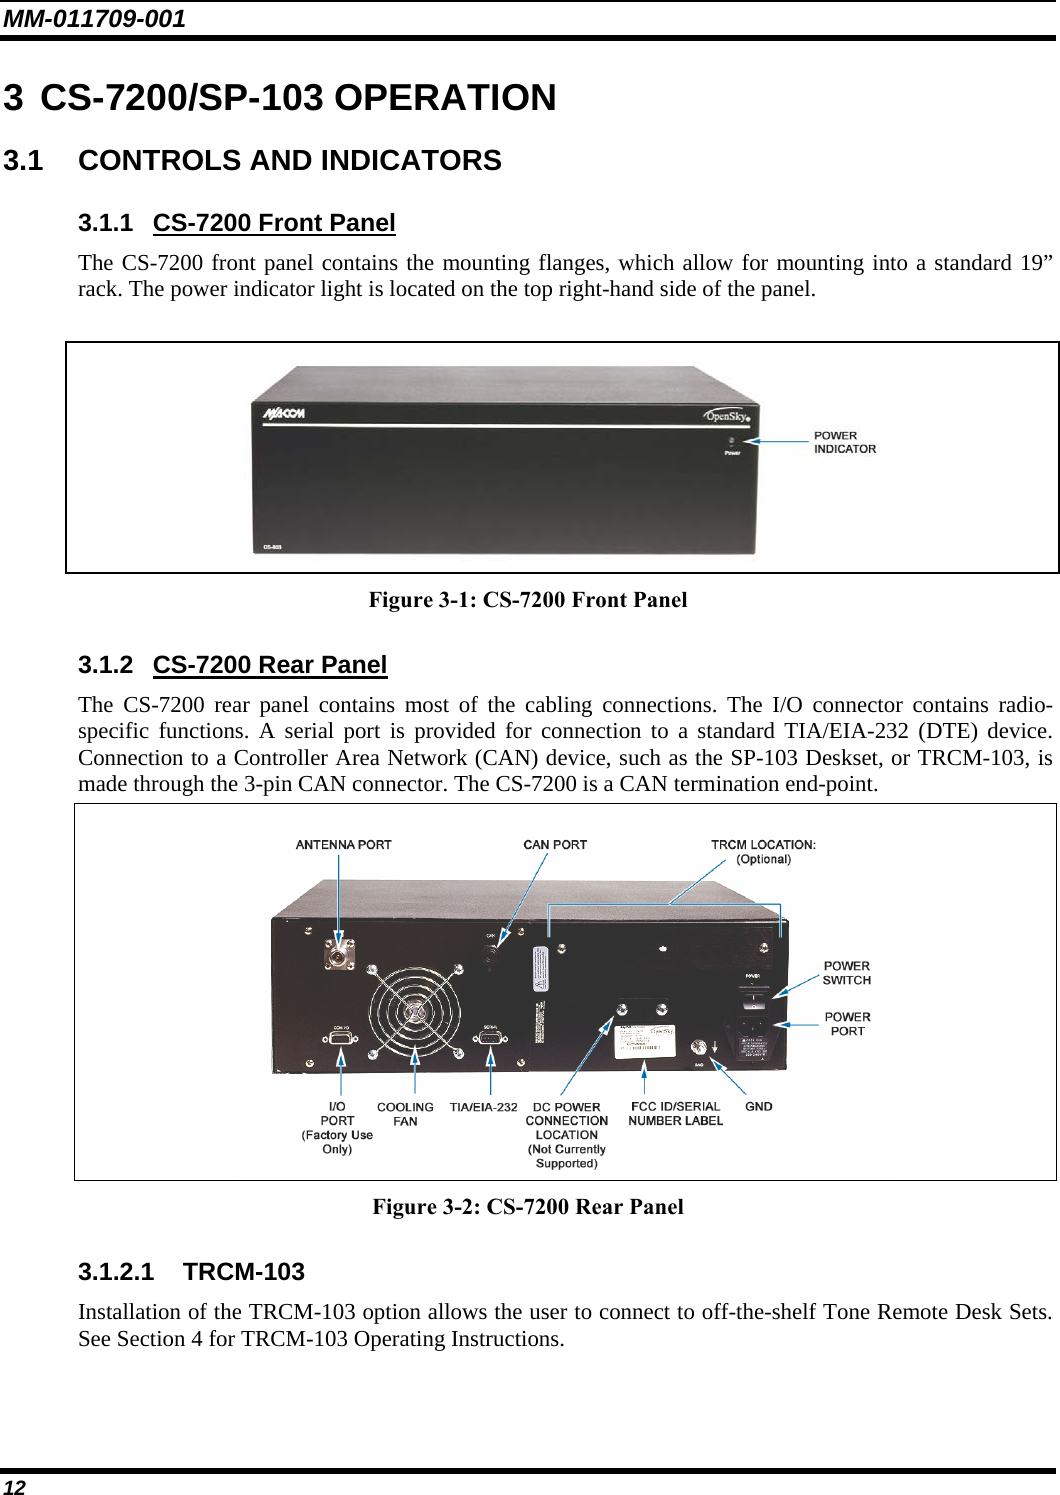 MM-011709-001 12 3 CS-7200/SP-103 OPERATION 3.1  CONTROLS AND INDICATORS 3.1.1  CS-7200 Front Panel The CS-7200 front panel contains the mounting flanges, which allow for mounting into a standard 19” rack. The power indicator light is located on the top right-hand side of the panel.   Figure 3-1: CS-7200 Front Panel 3.1.2  CS-7200 Rear Panel The CS-7200 rear panel contains most of the cabling connections. The I/O connector contains radio-specific functions. A serial port is provided for connection to a standard TIA/EIA-232 (DTE) device. Connection to a Controller Area Network (CAN) device, such as the SP-103 Deskset, or TRCM-103, is made through the 3-pin CAN connector. The CS-7200 is a CAN termination end-point.   Figure 3-2: CS-7200 Rear Panel 3.1.2.1 TRCM-103 Installation of the TRCM-103 option allows the user to connect to off-the-shelf Tone Remote Desk Sets. See Section 4 for TRCM-103 Operating Instructions.  